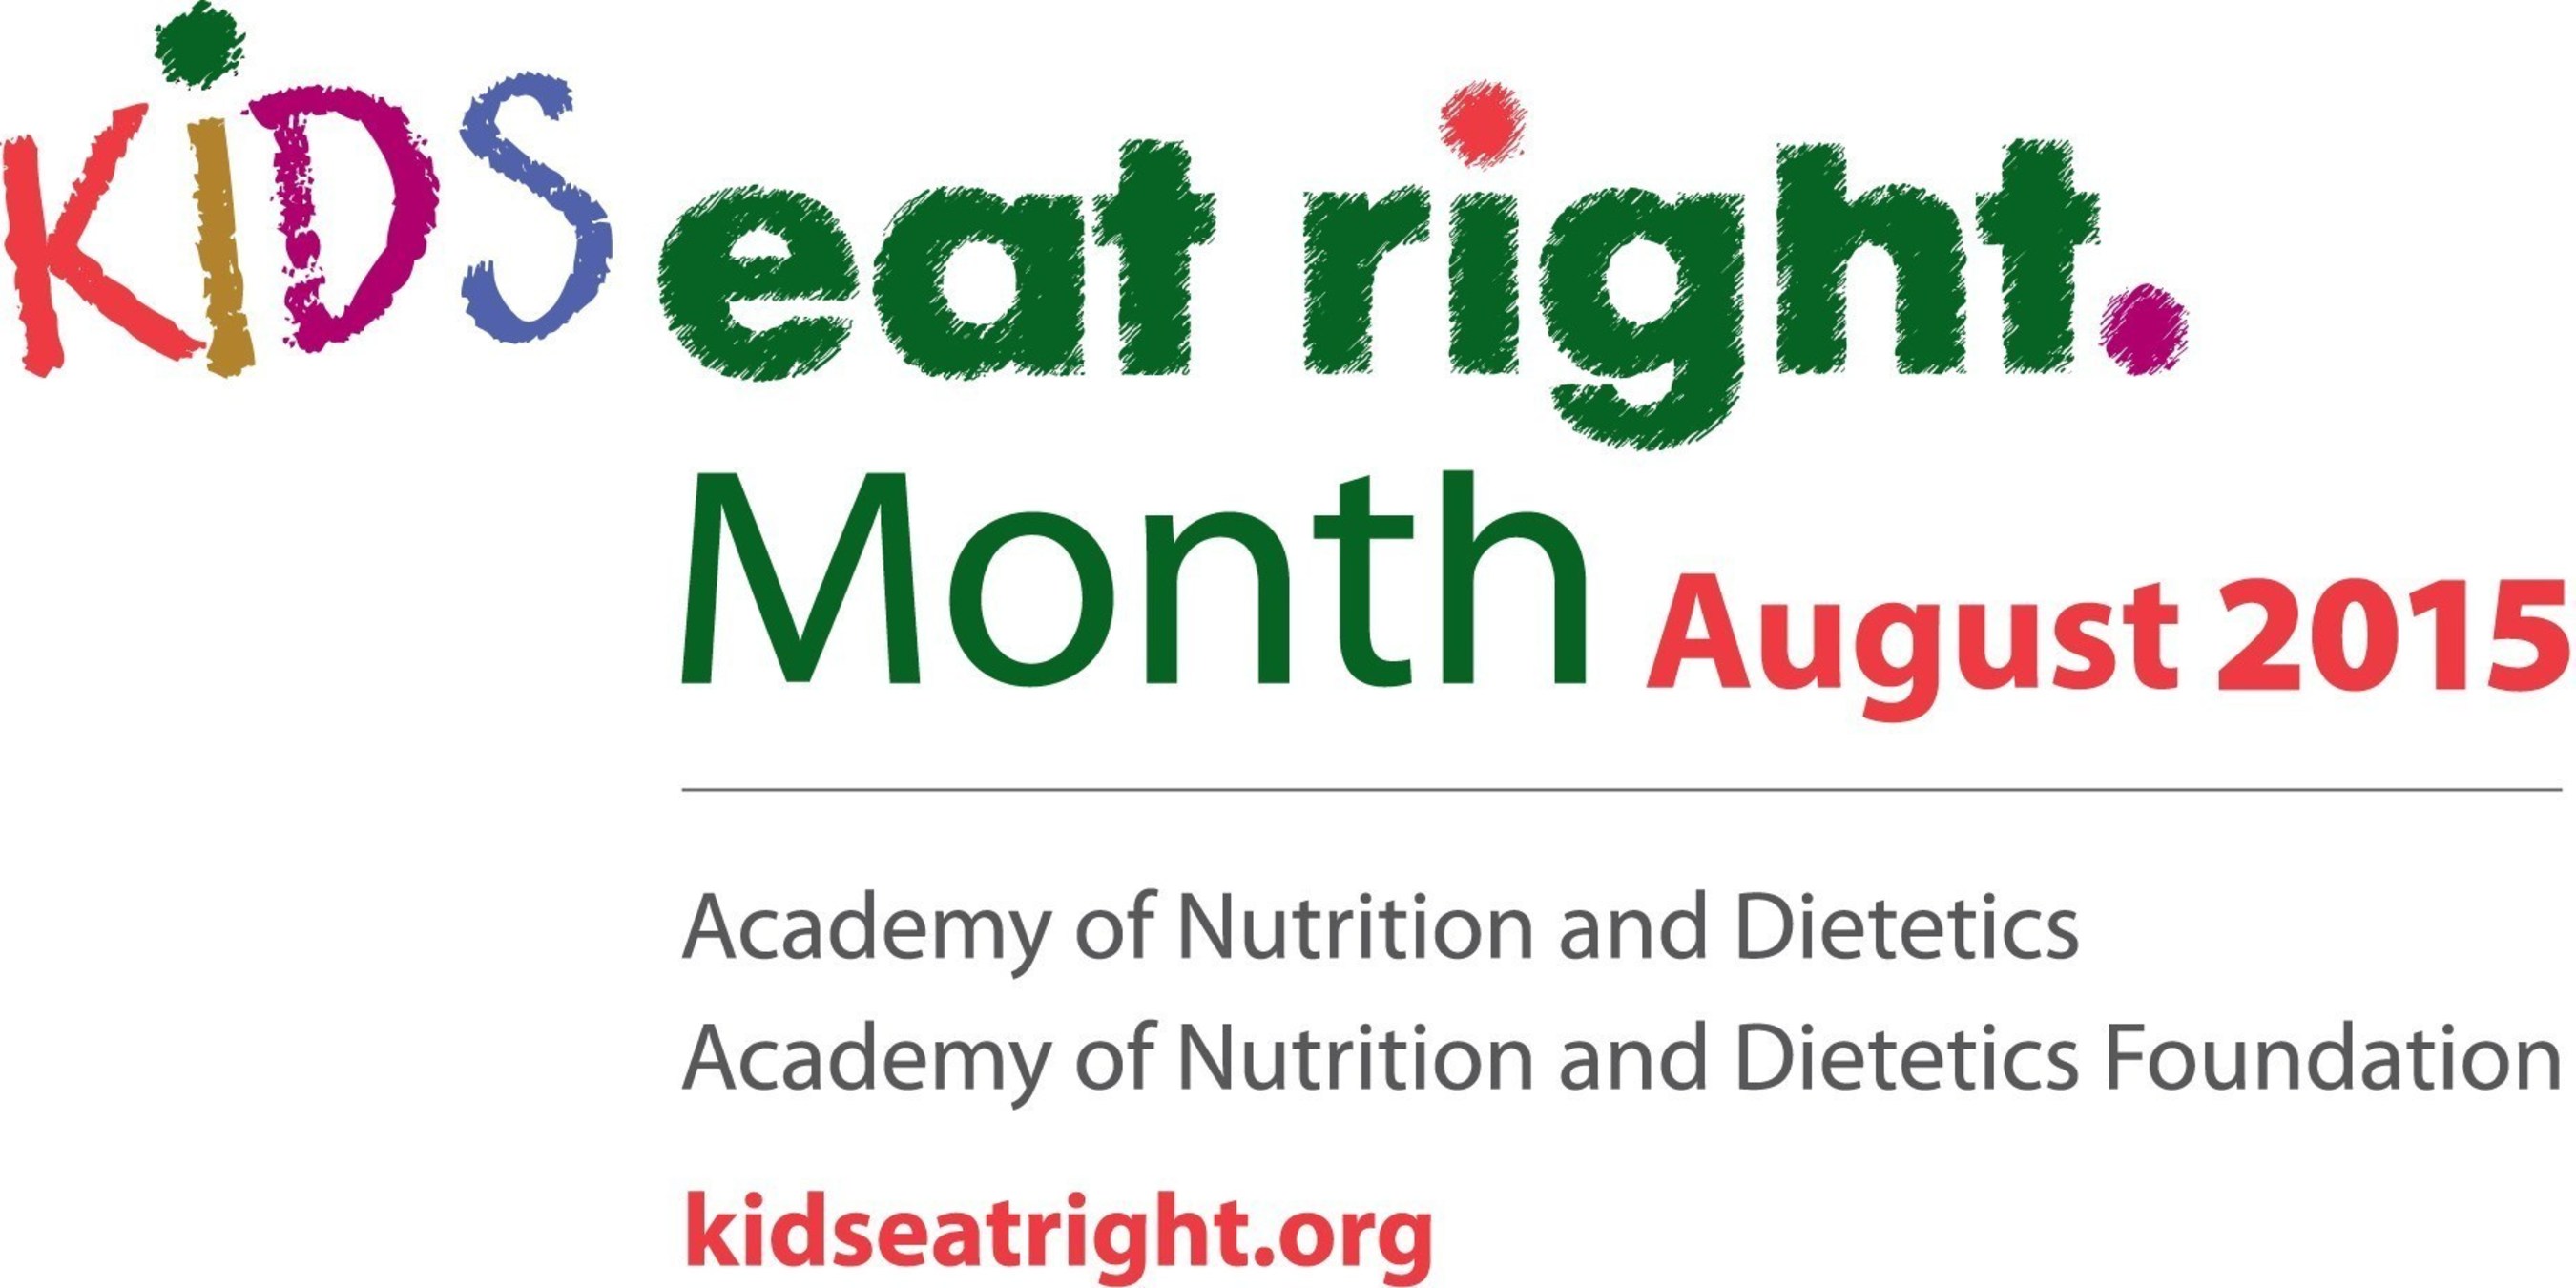 Kids Eat Right Month focuses on the importance of healthful eating and active lifestyles for children and families, featuring expert advice from registered dietitian nutritionists to help families achieve the Kids Eat Right core principles: "shop smart, cook healthy and eat right." Learn more at www.kidseatright.org.